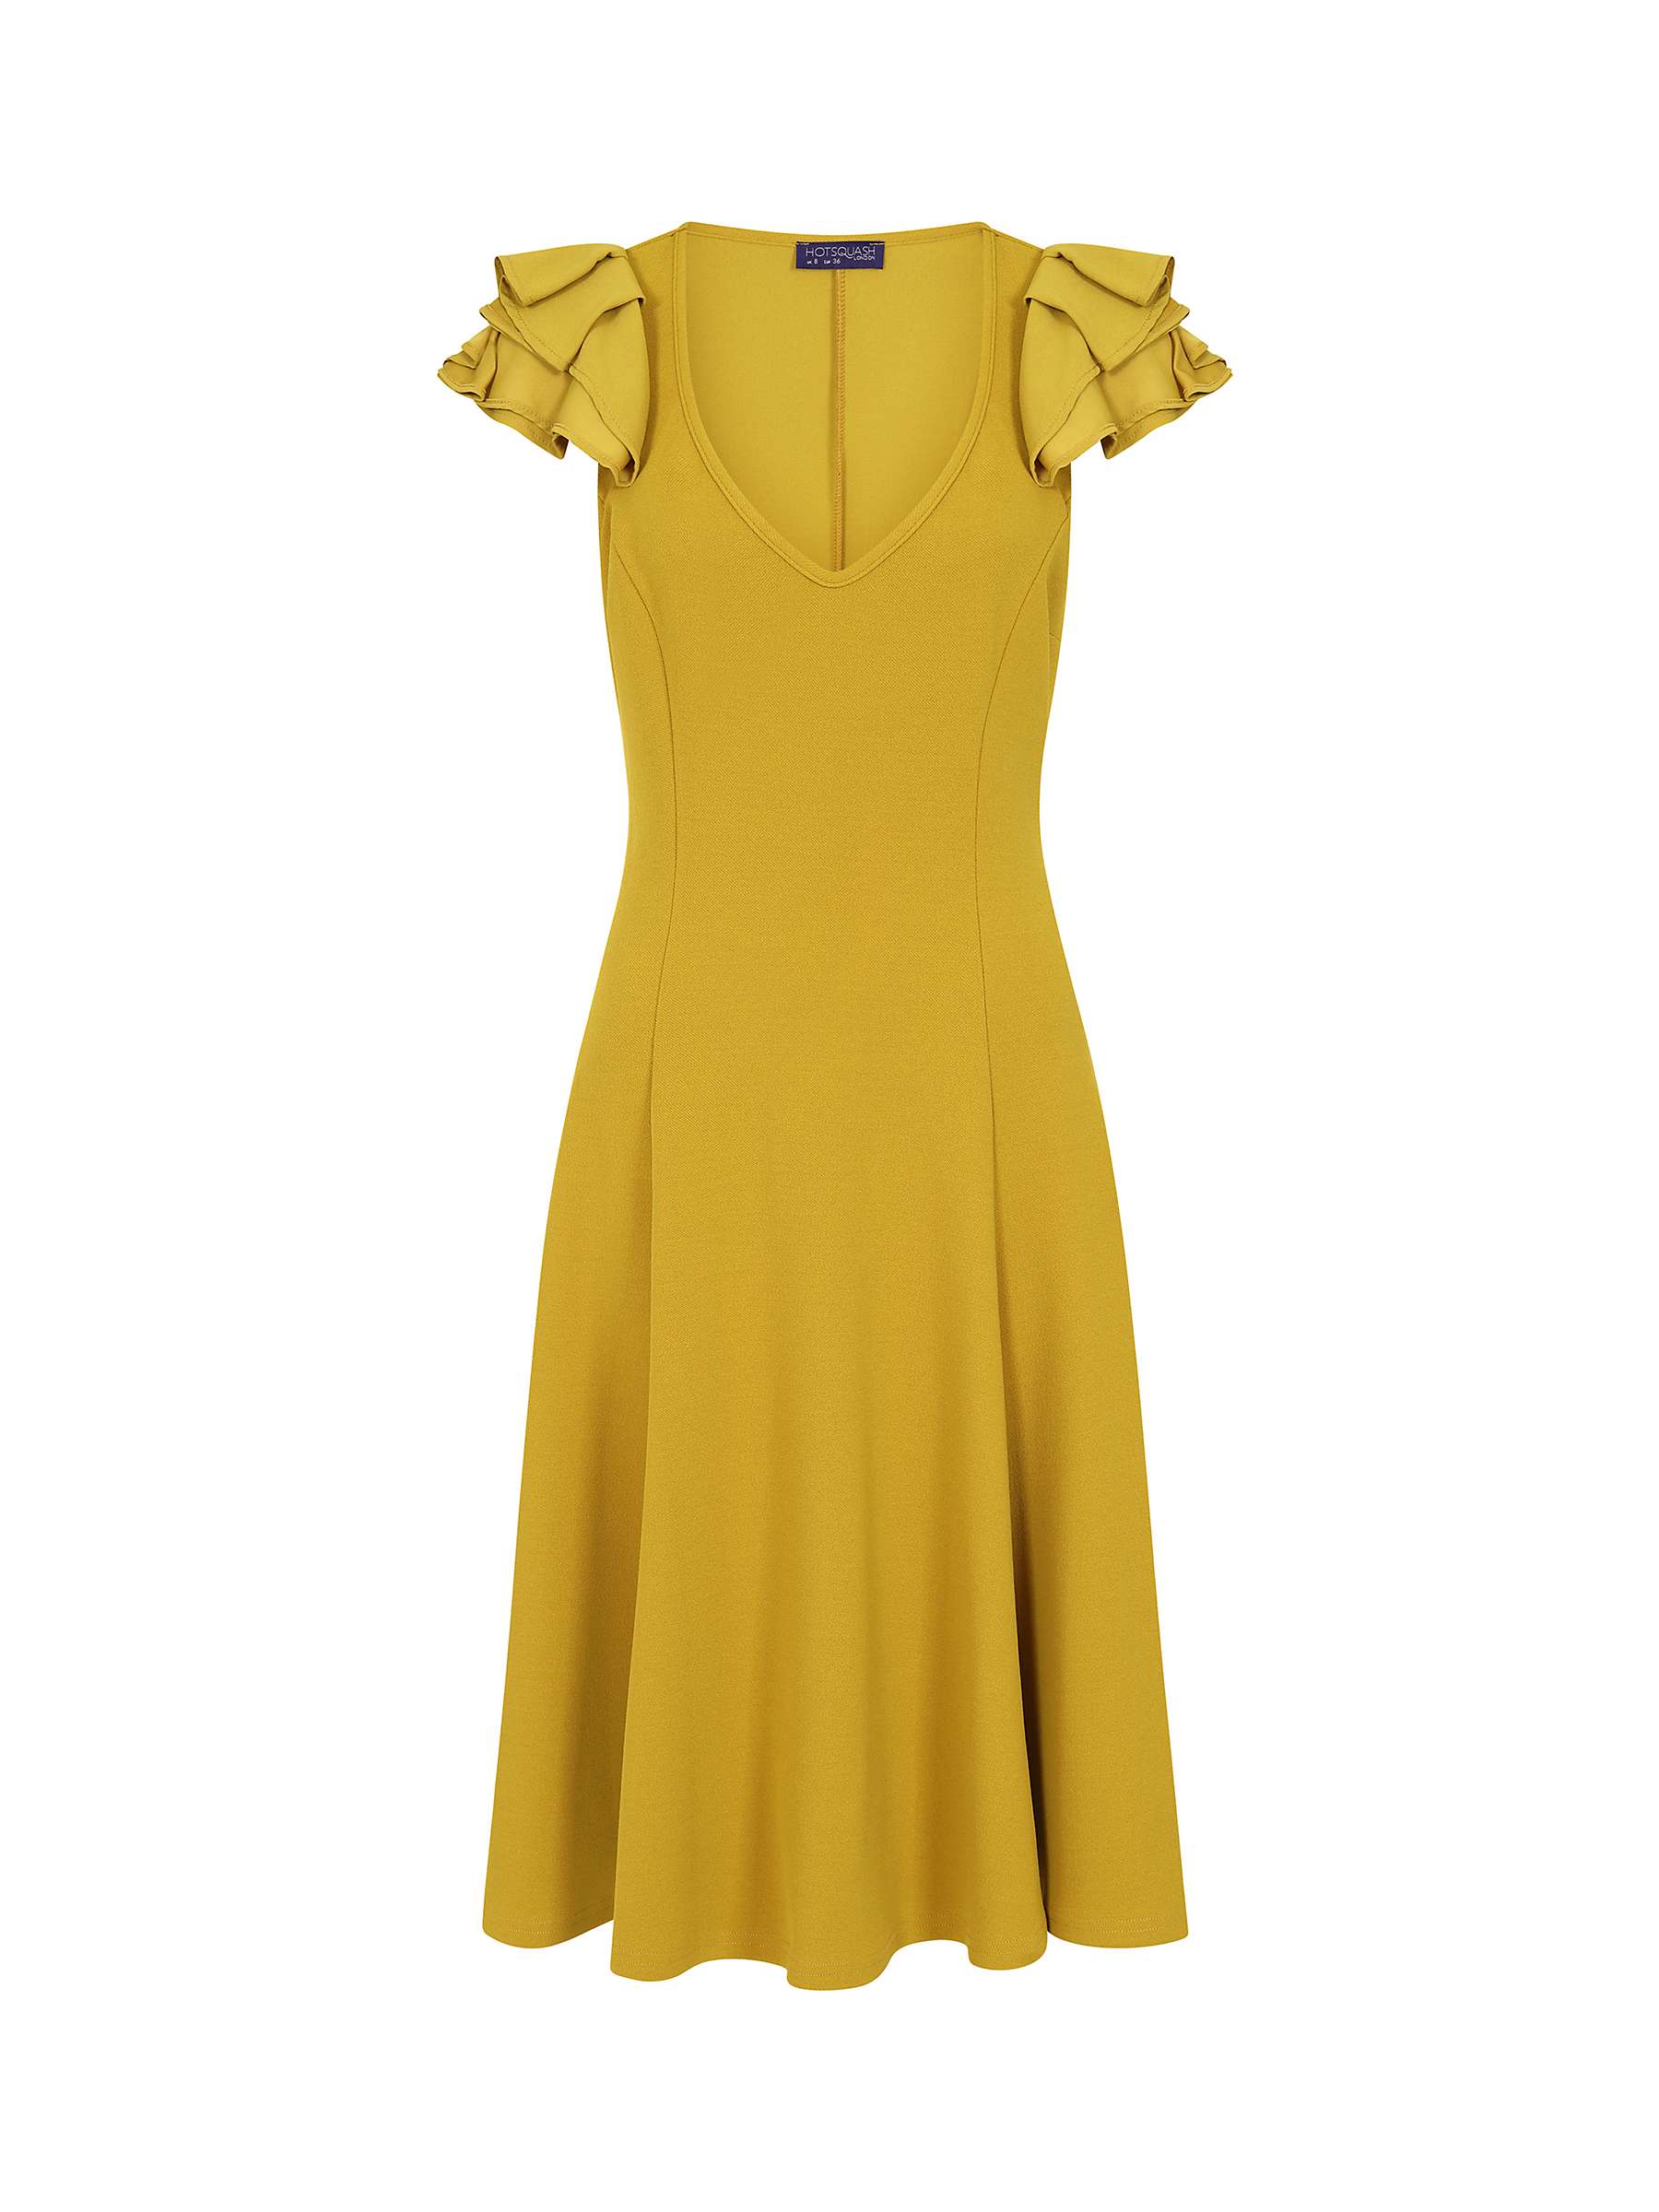 Buy HotSquash Frill Sleeve A-Line Dress Online at johnlewis.com